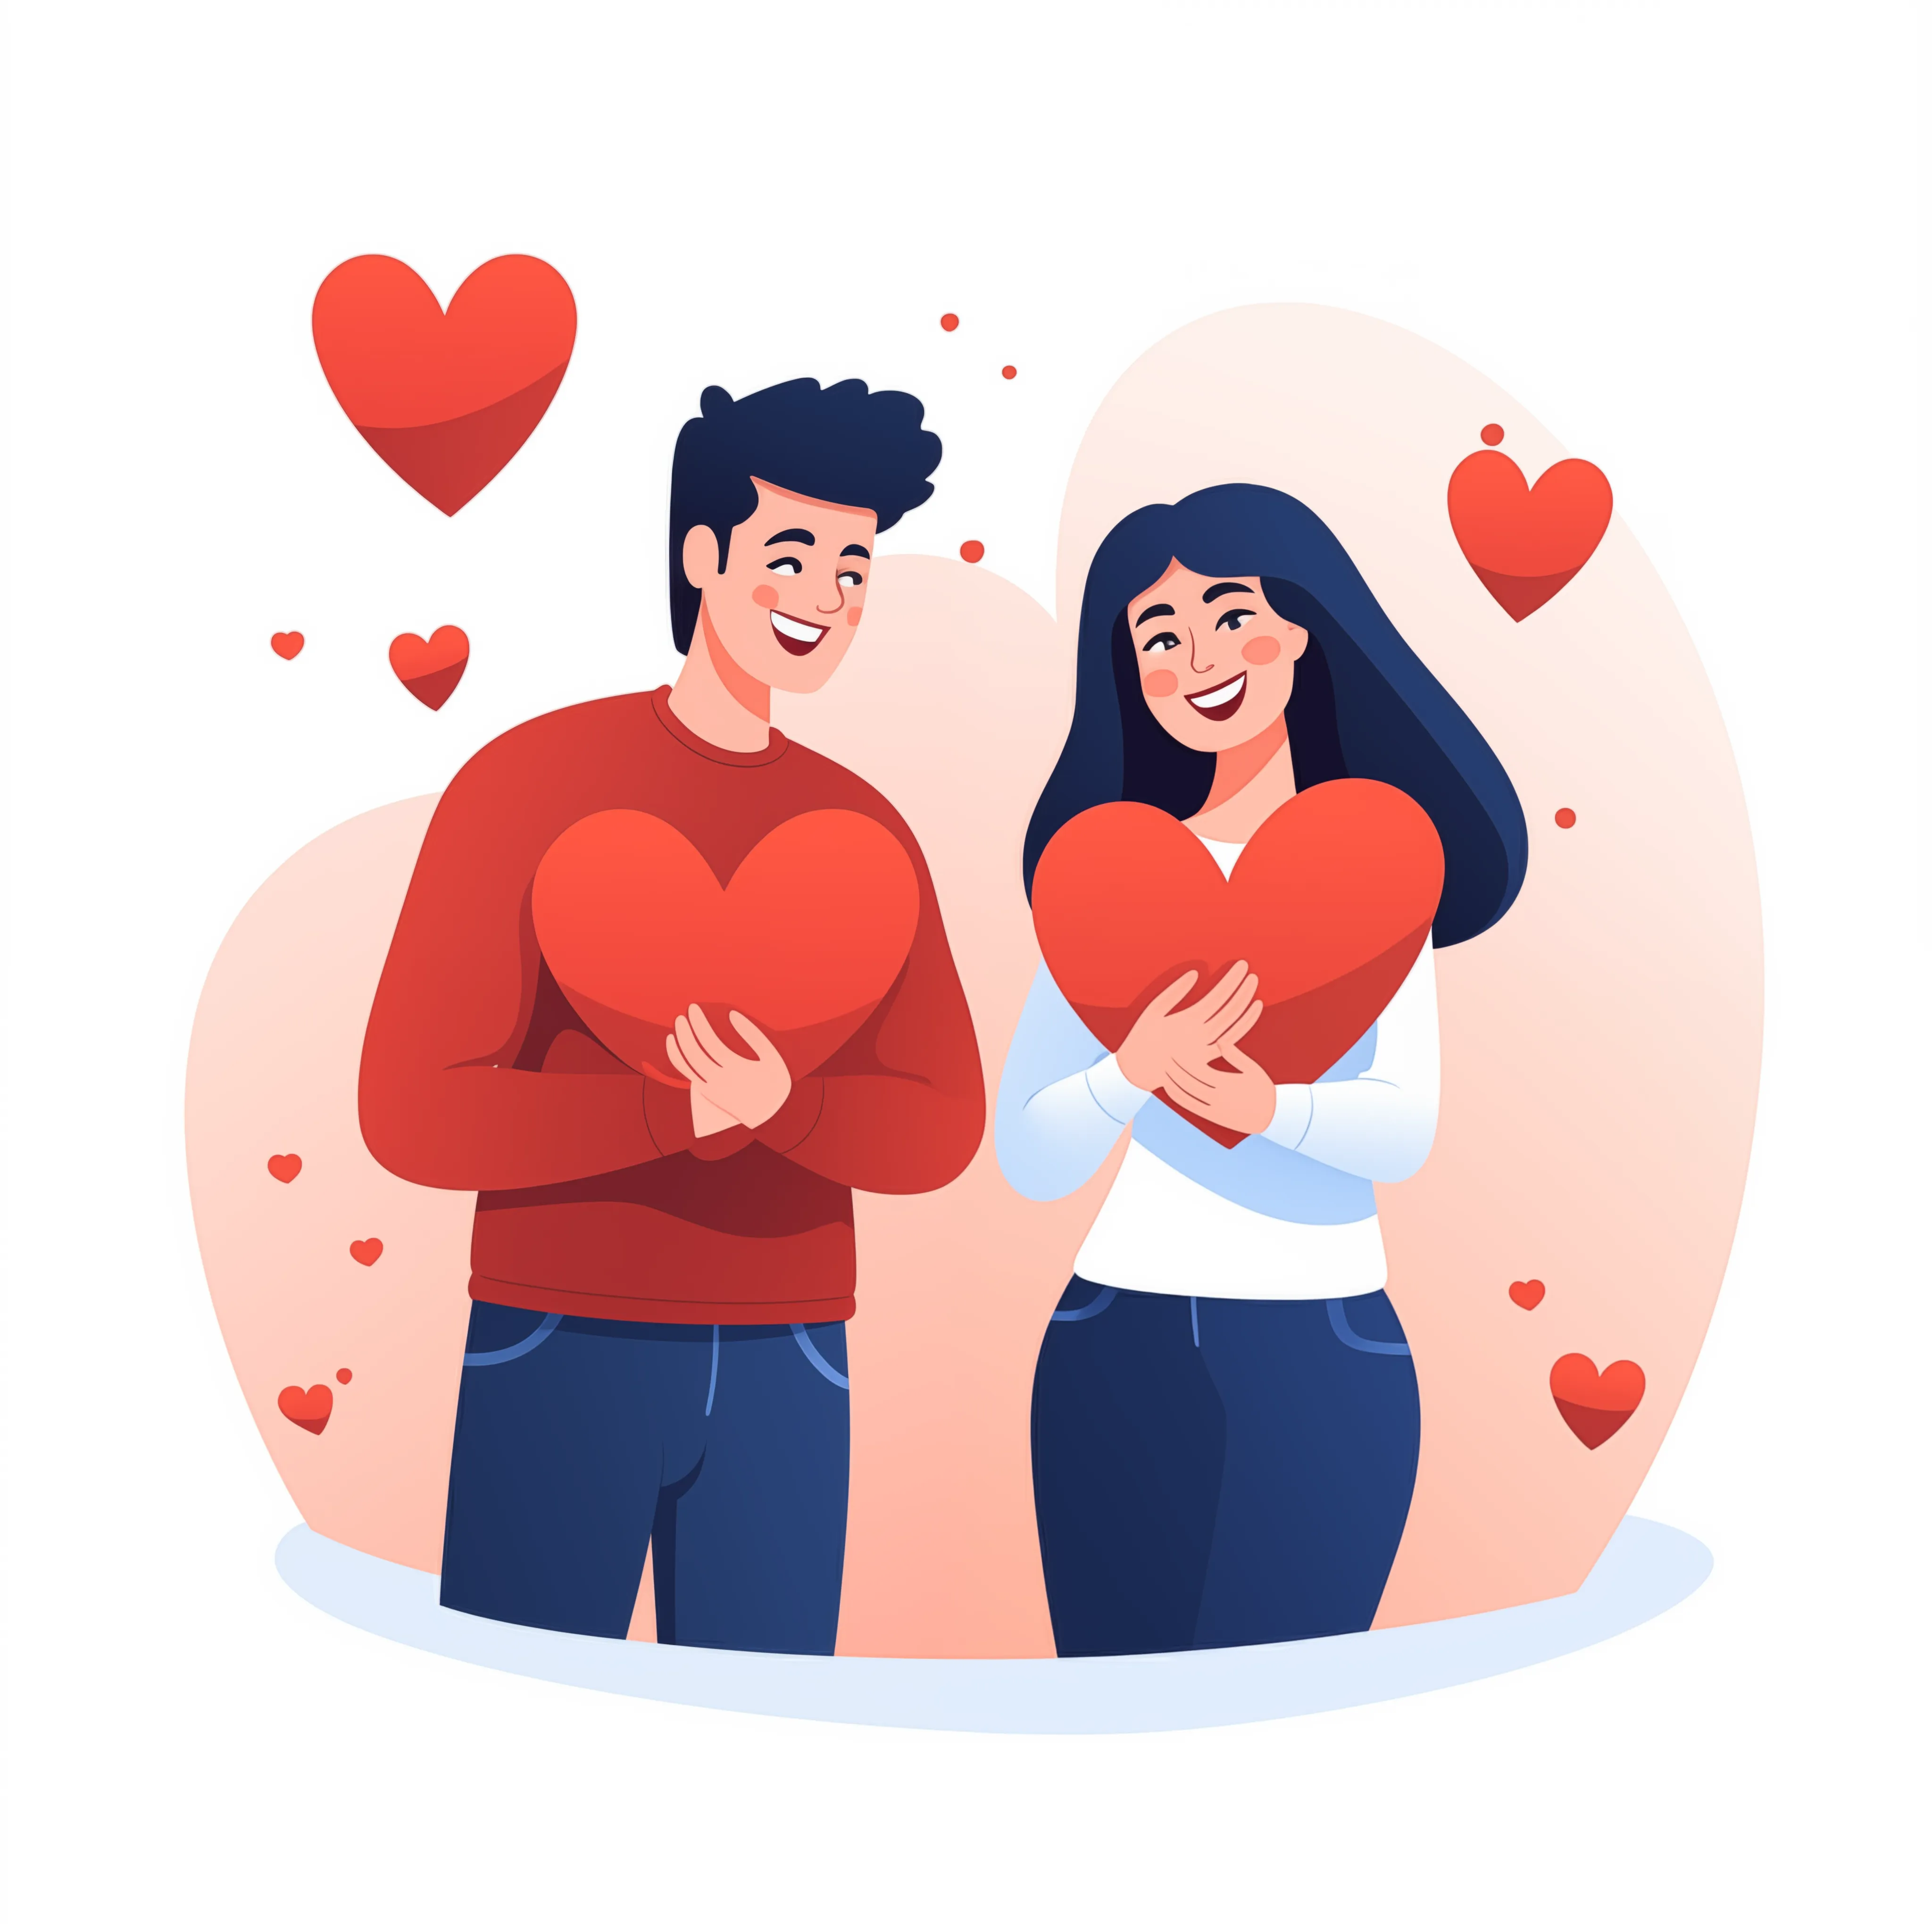 With so many sexy singles on tap, your heart is bound to skip a beat while chatting on sites like 321sexchat. Just take safety precautions and have fun connecting.